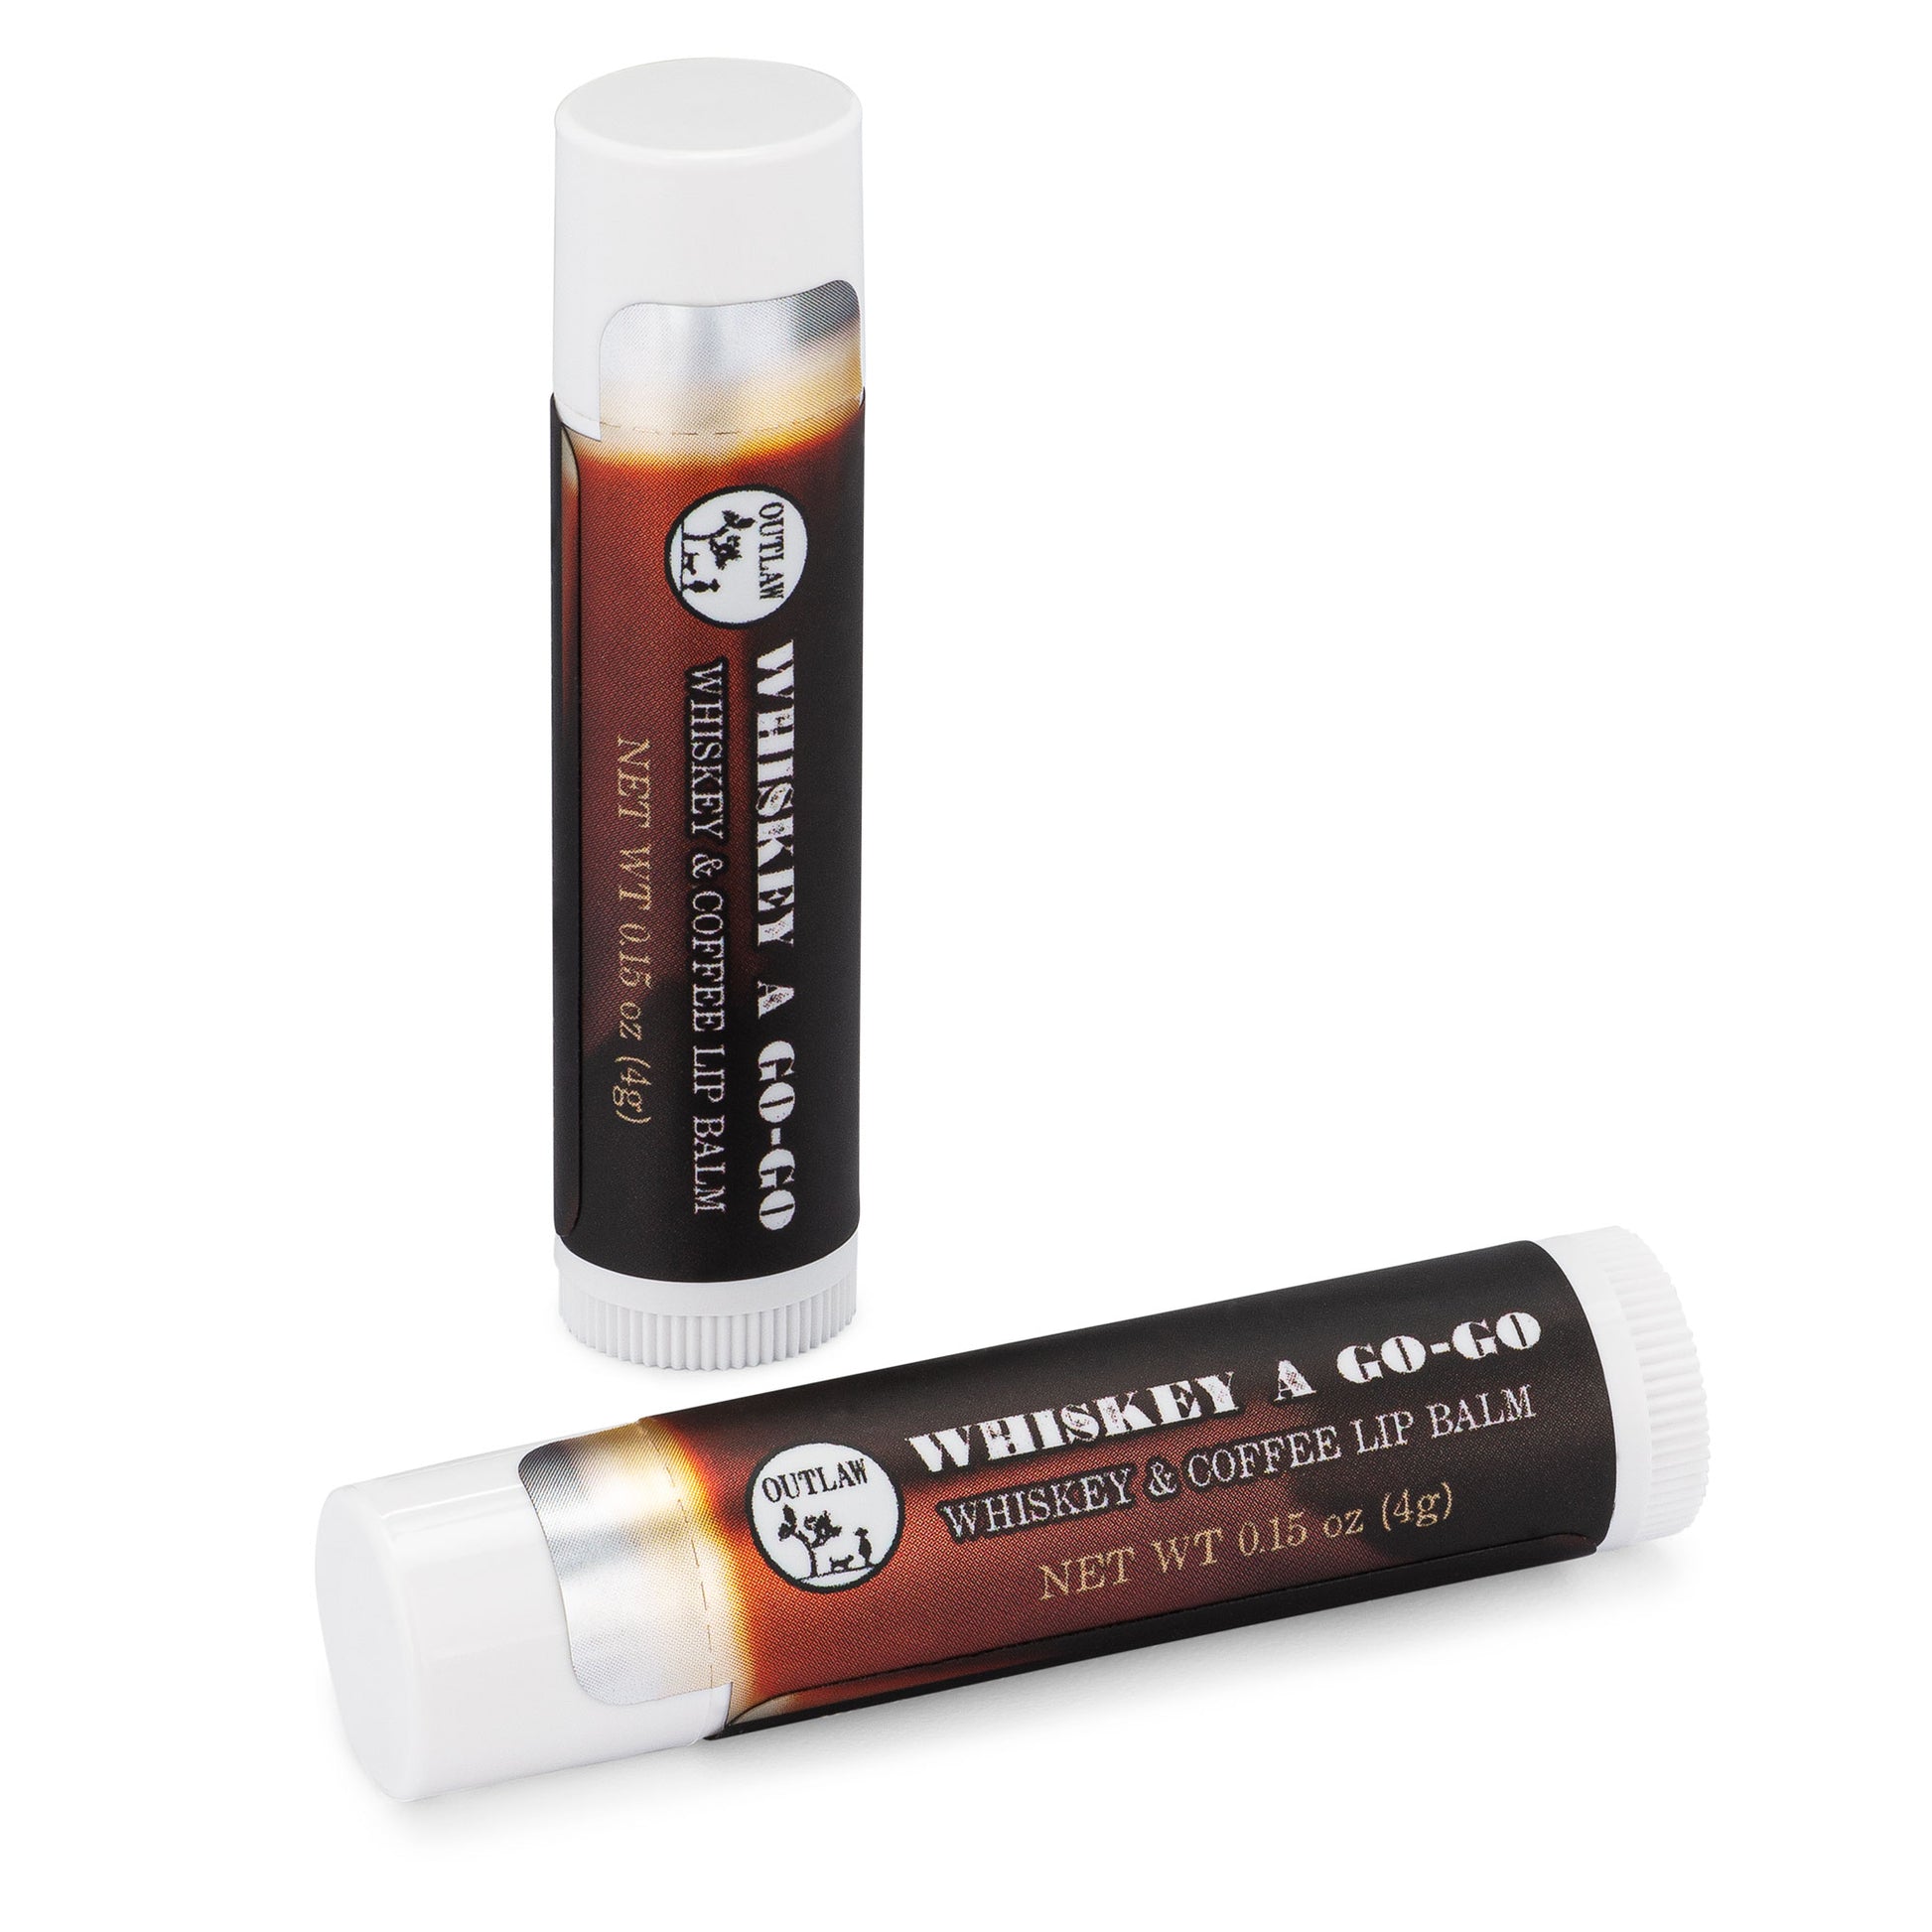 Outlaw whiskey a go go whiskey and coffee flavored lip balm